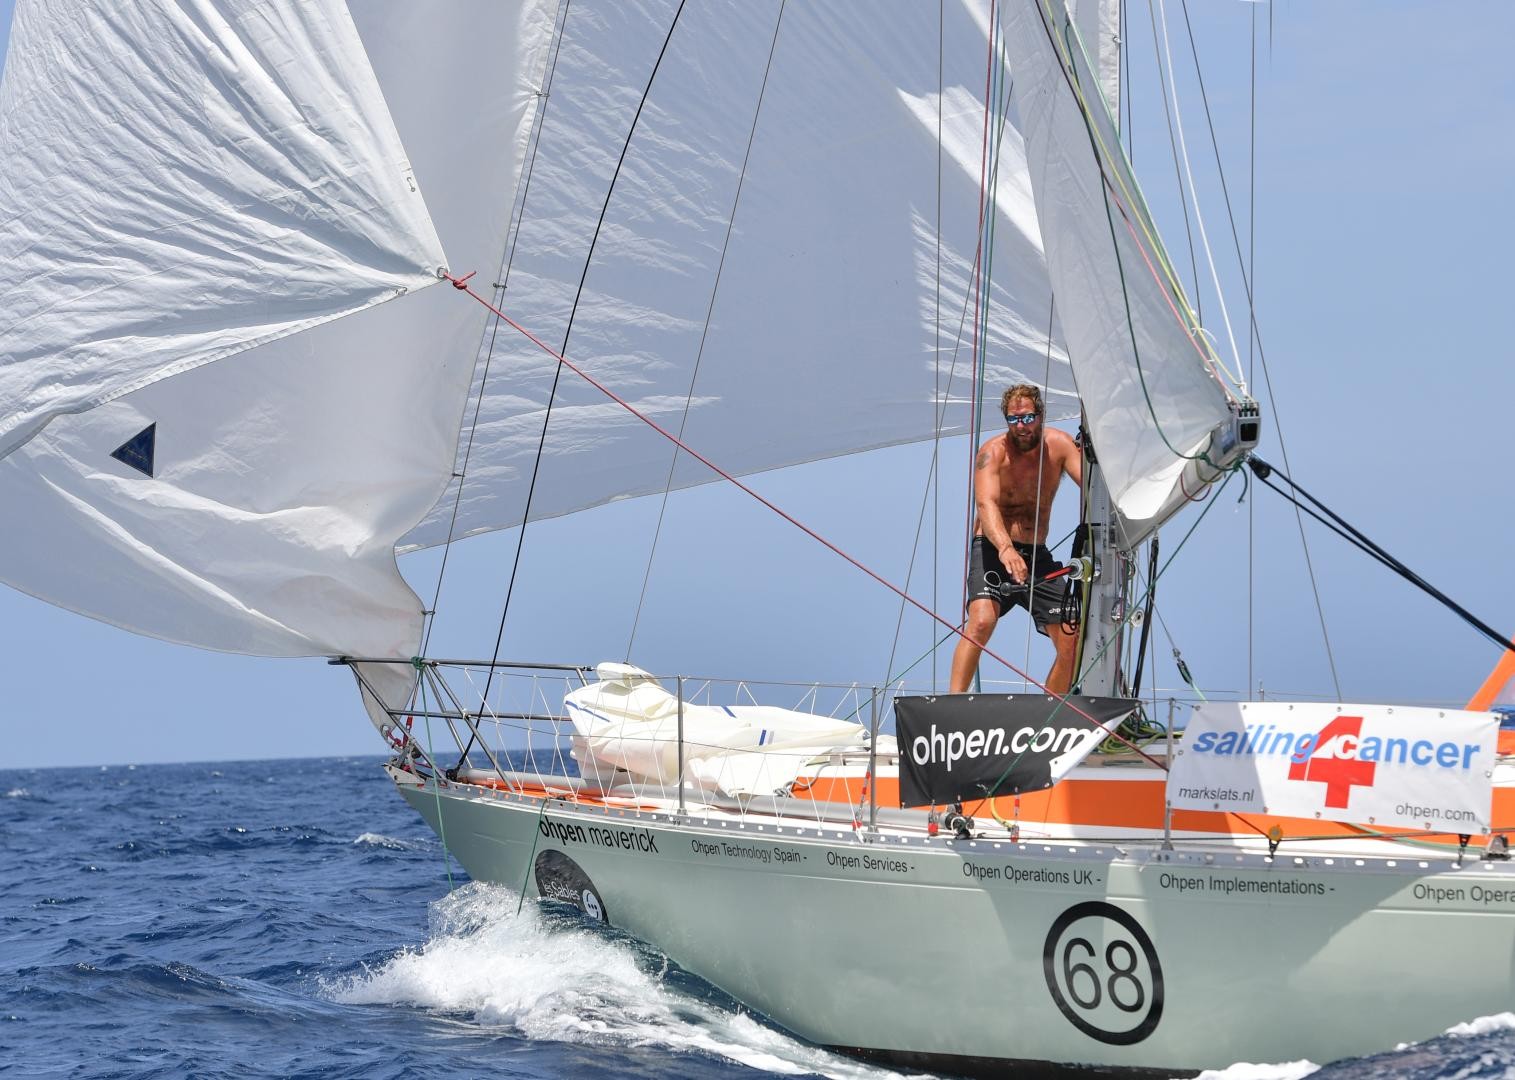 Mark Slats (NED) sailing the Rustler 36 Ohpen Maverick is relishing the  sleigh ride conditions in the trade winds and keeping the pressure on race leader Philippe Péché. Photo: Christophe Favreau